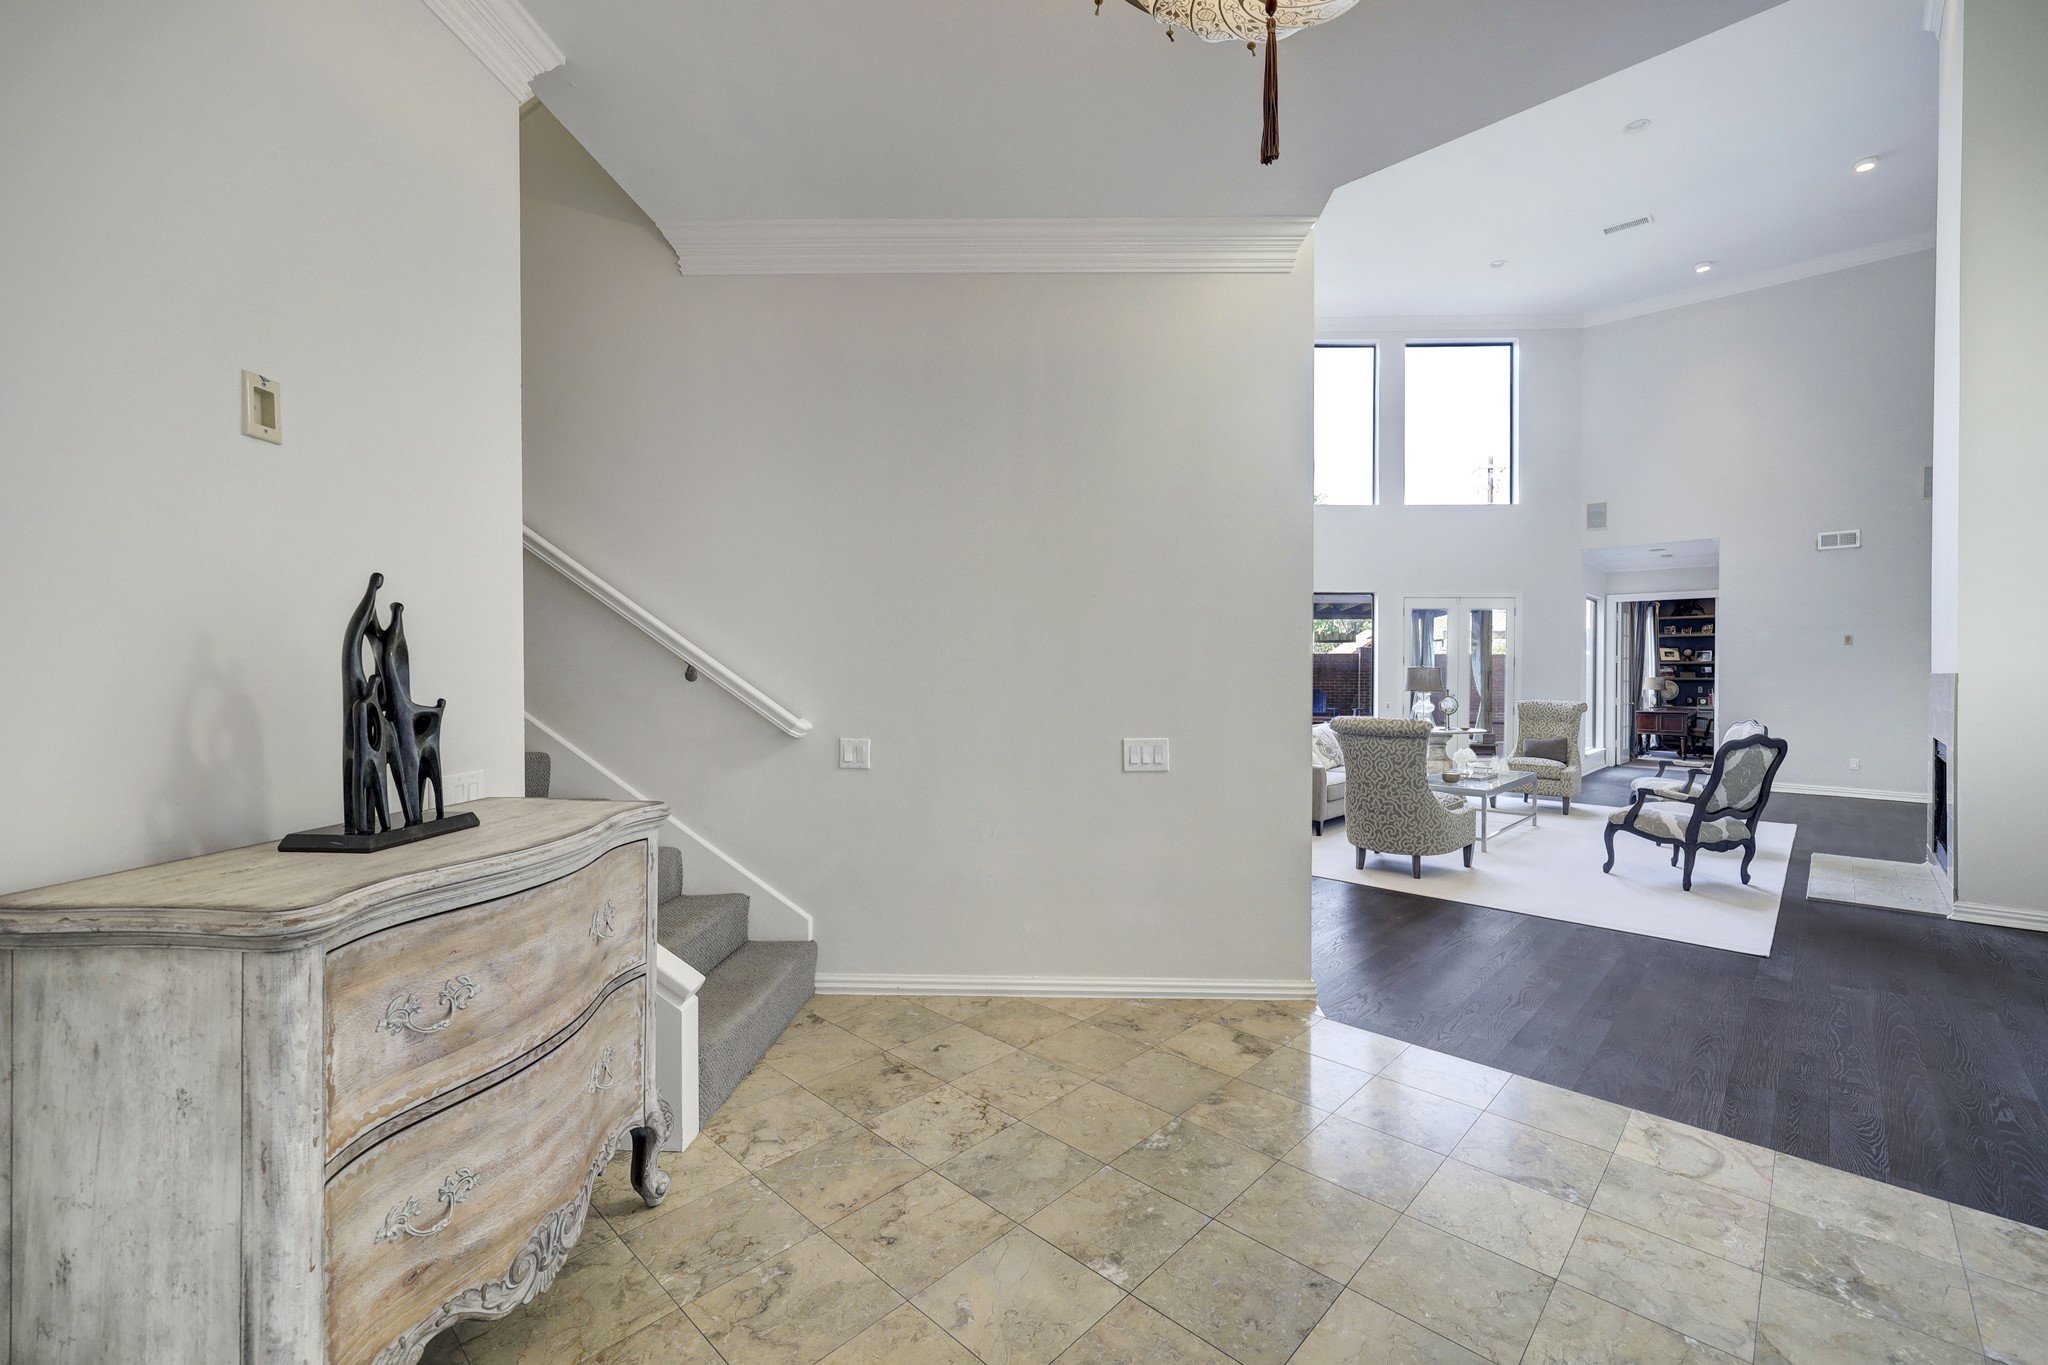 When you step into the formal foyer, you are greeted with an abundance of natural lighting from the living area.